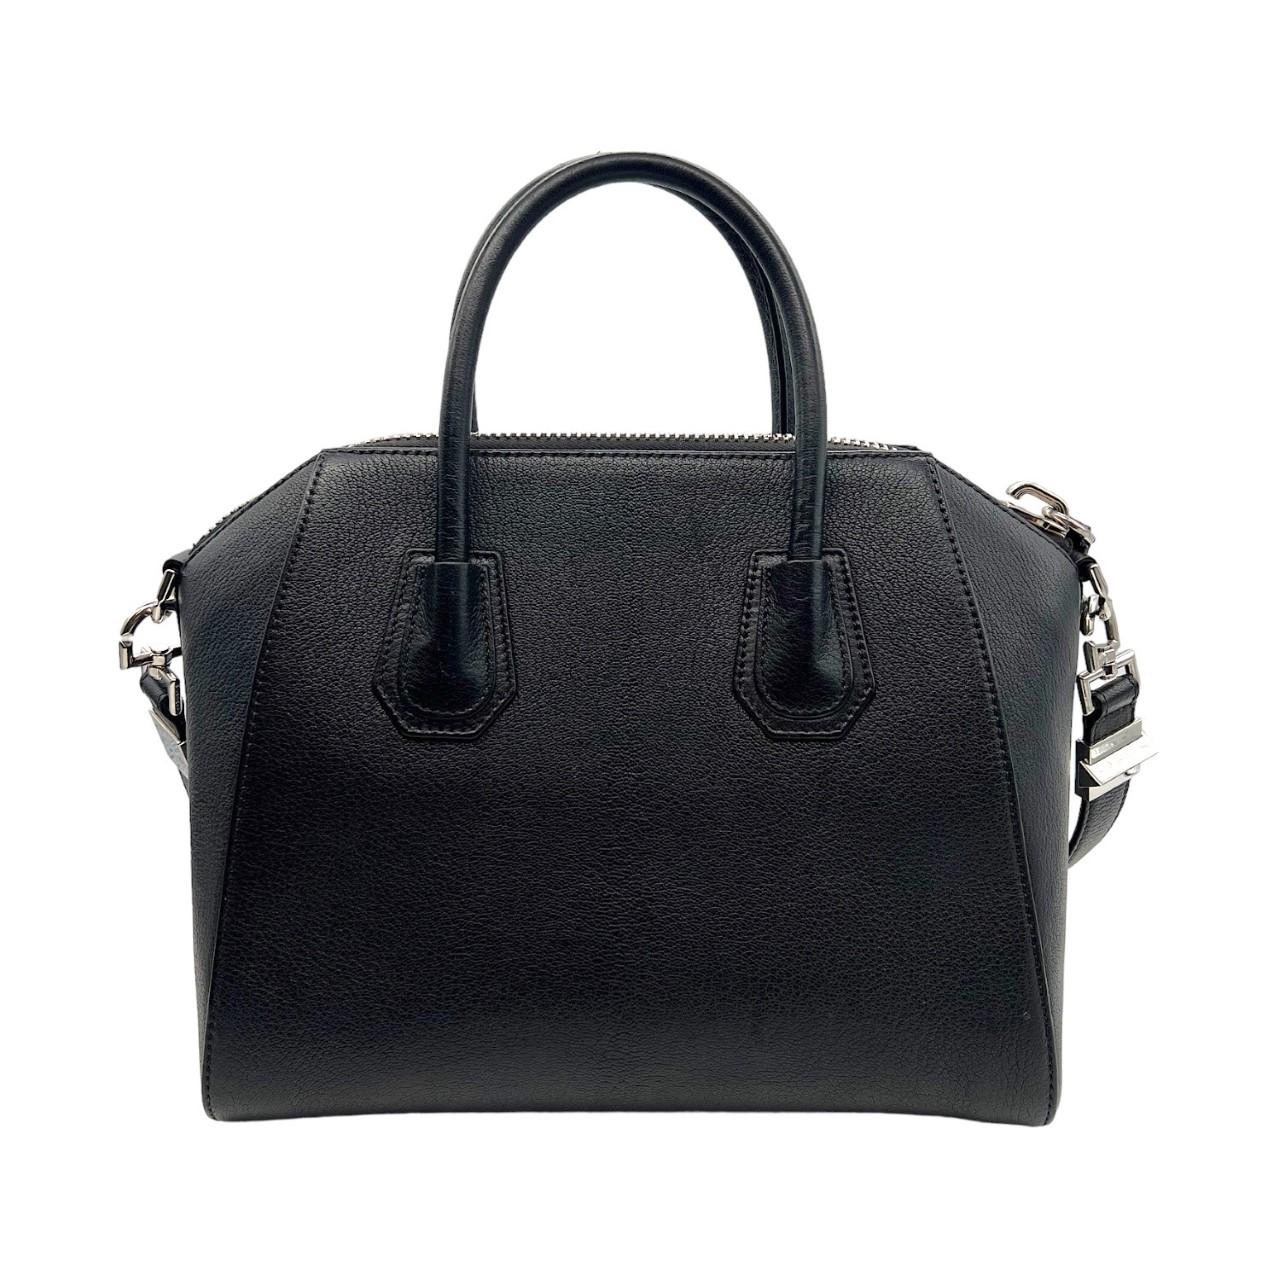 We are offering this black Givenchy Antigona handbag. Made in Italy, it is finely crafted of a black calfskin leather exterior with a 'GIVENCHY' logo in silver-tone hardware. It has dual calfskin leather rolled handles and a removeable shoulder